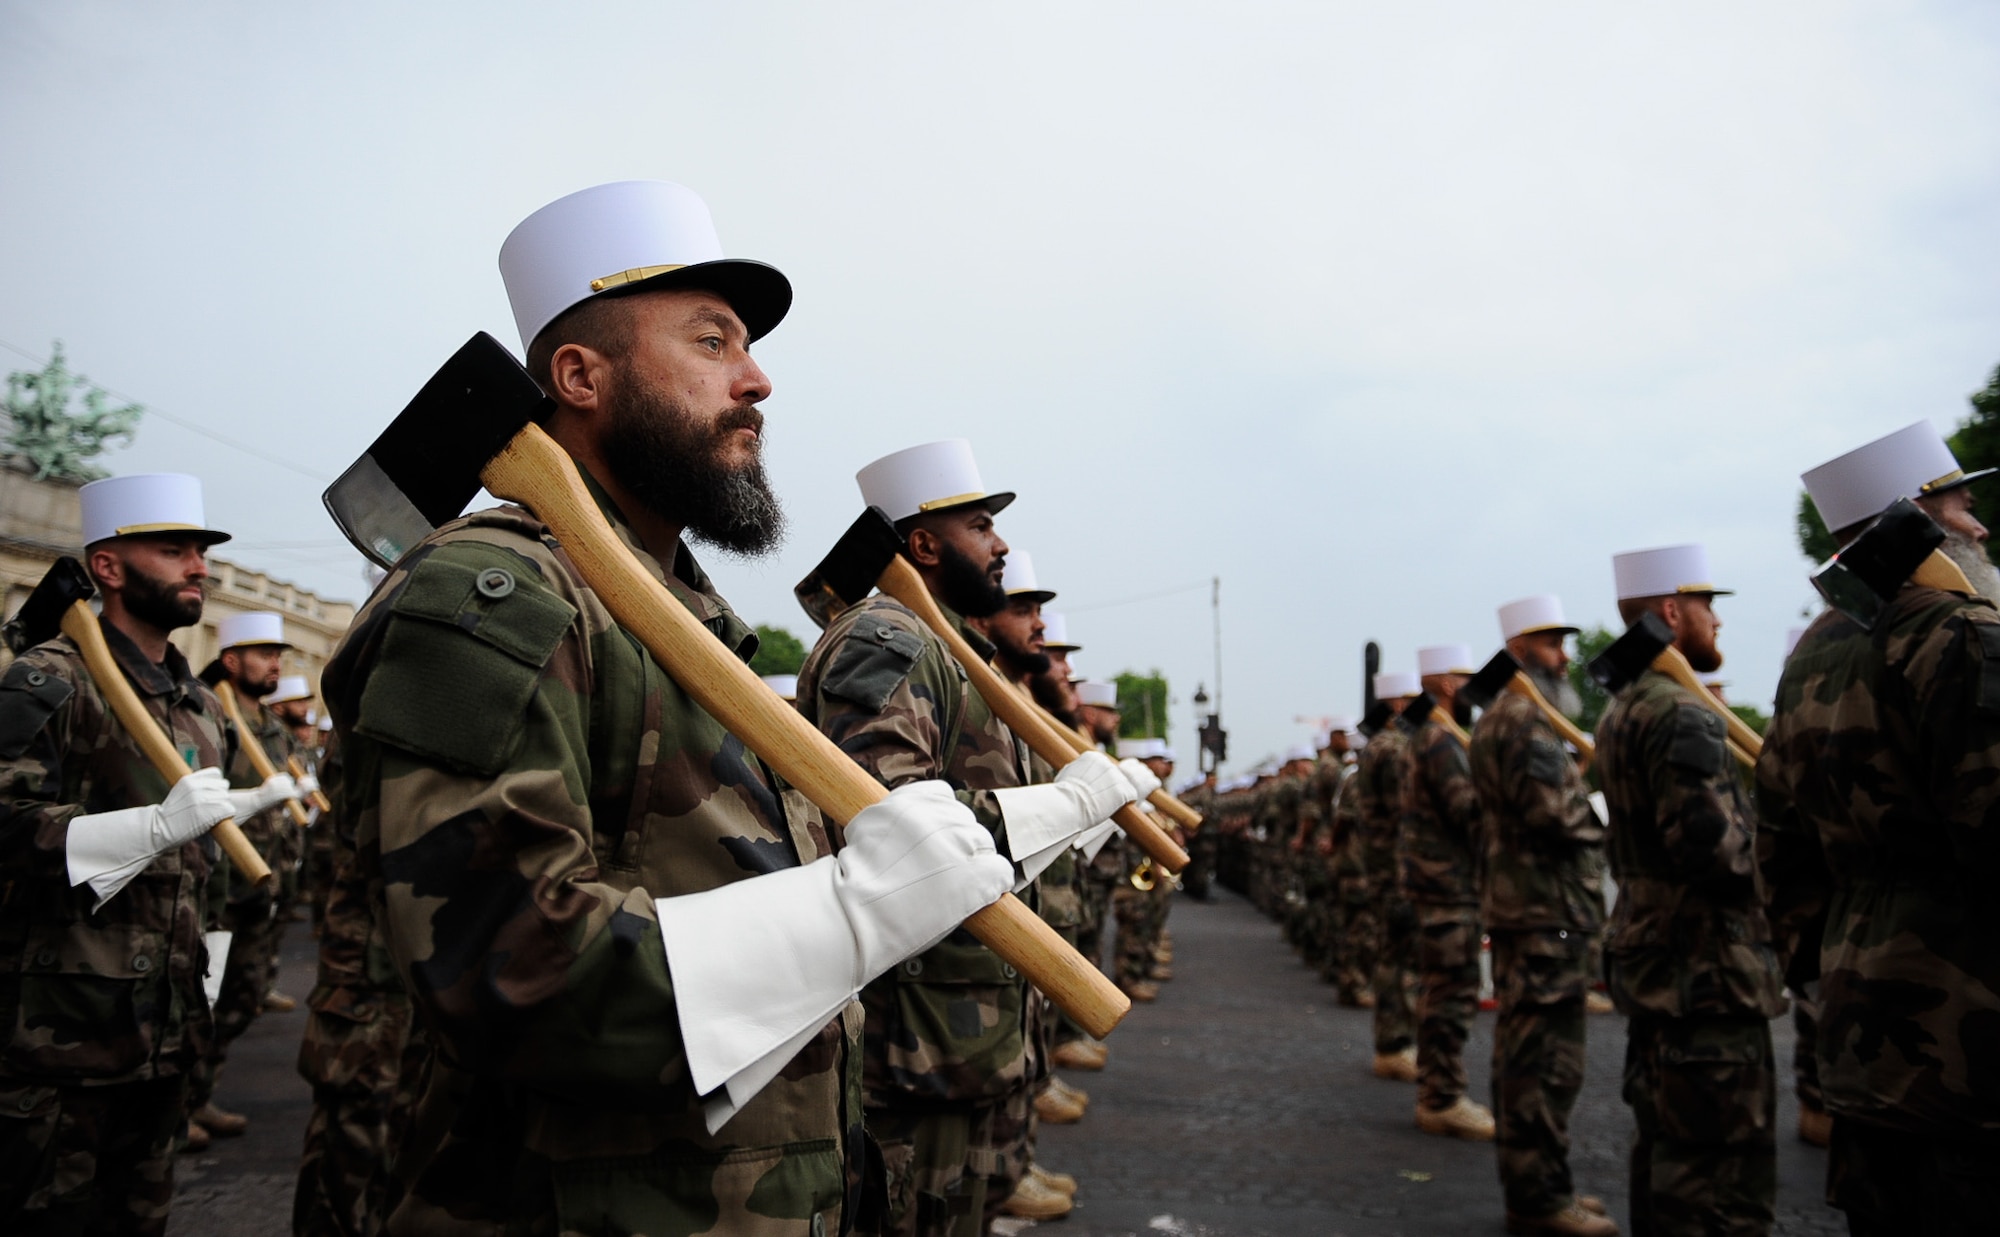 Members of the French Foreign Legion stand in formation during a Bastille Day military parade rehearsal at the Avenue des Champs-Élysées, France, July 10, 2017. The parade included more than 7,000 military personnel and is the oldest military parade in existence dating back to 1880. (U.S. Air Force photo by Airman 1st Class Savannah L. Waters)